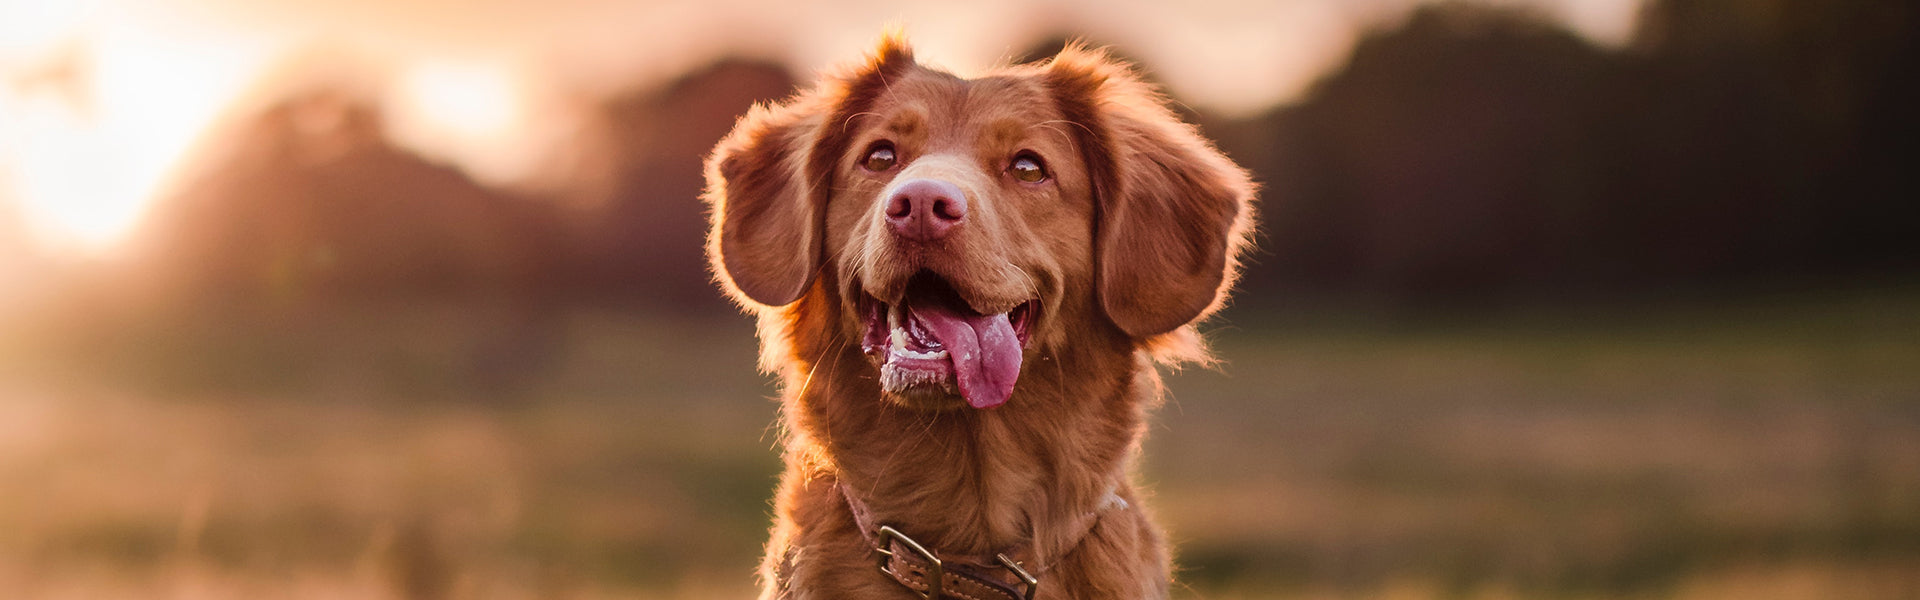 Brown dog smiling with its tongue out the side of its mouth